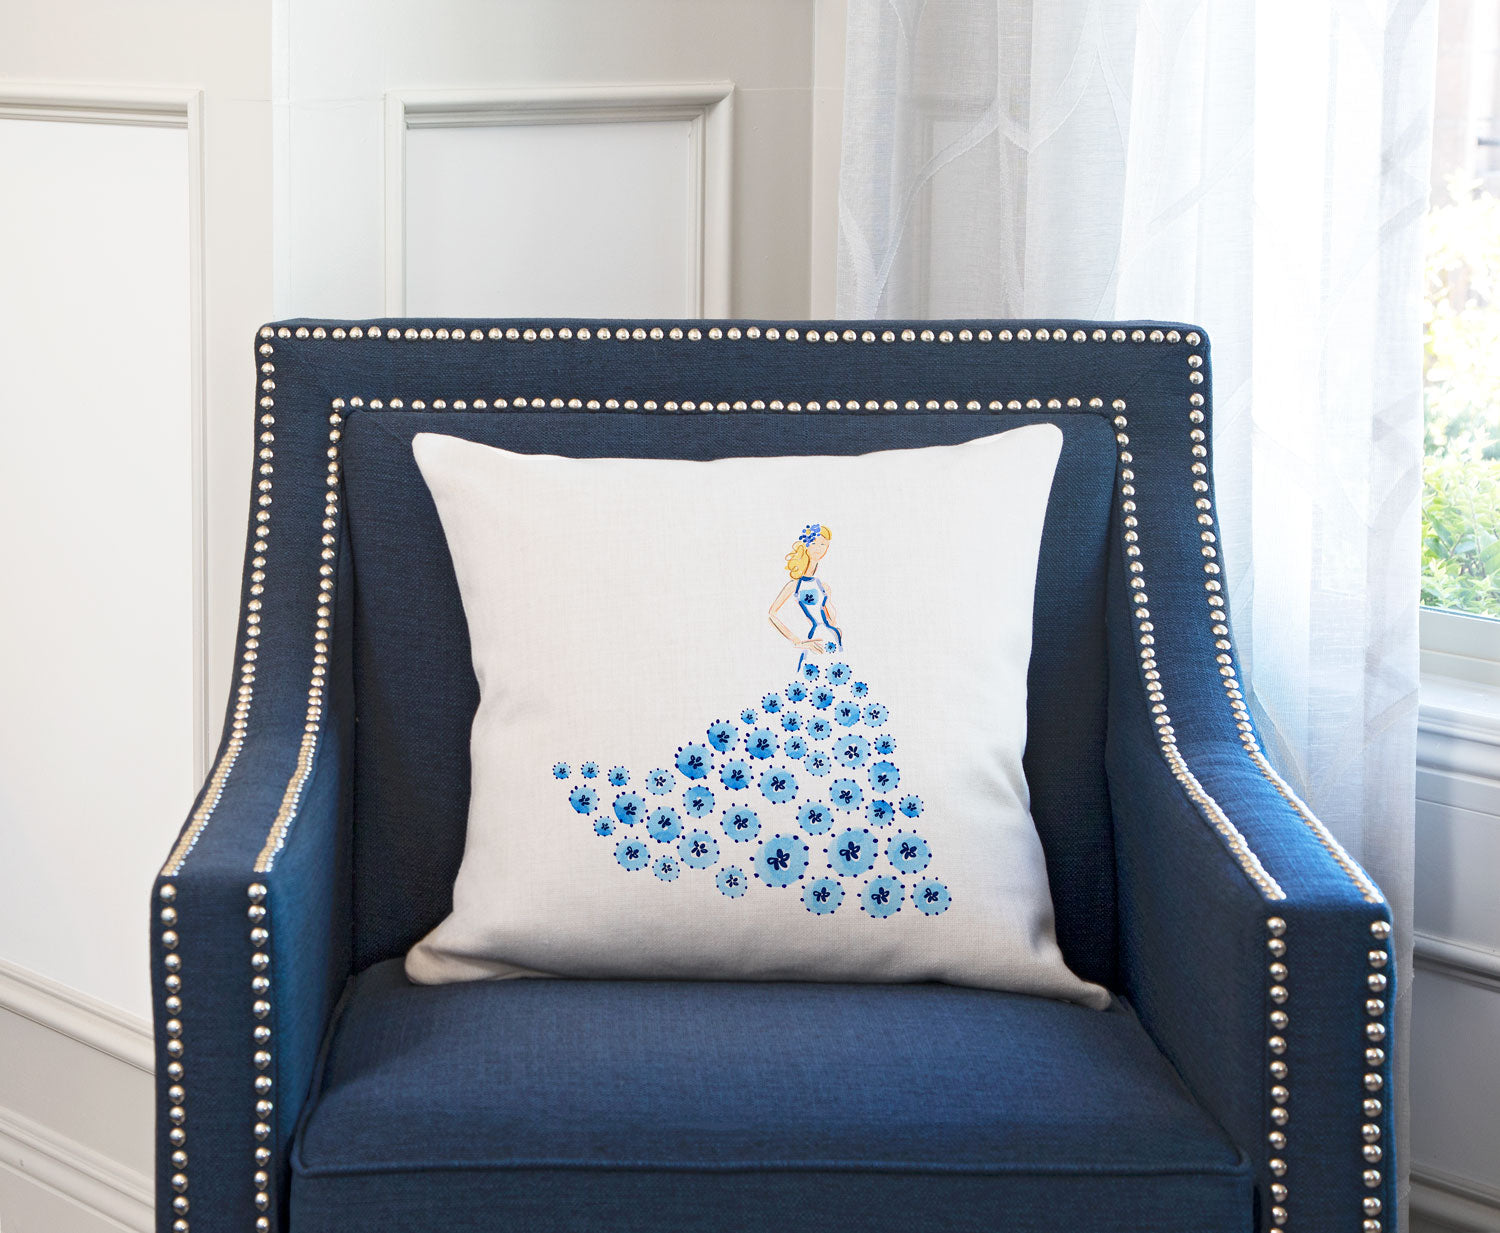 Fashionista Blue Throw Pillow Cover - Fashion Illustrations Throw Pillow Cover Collection-Di Lewis